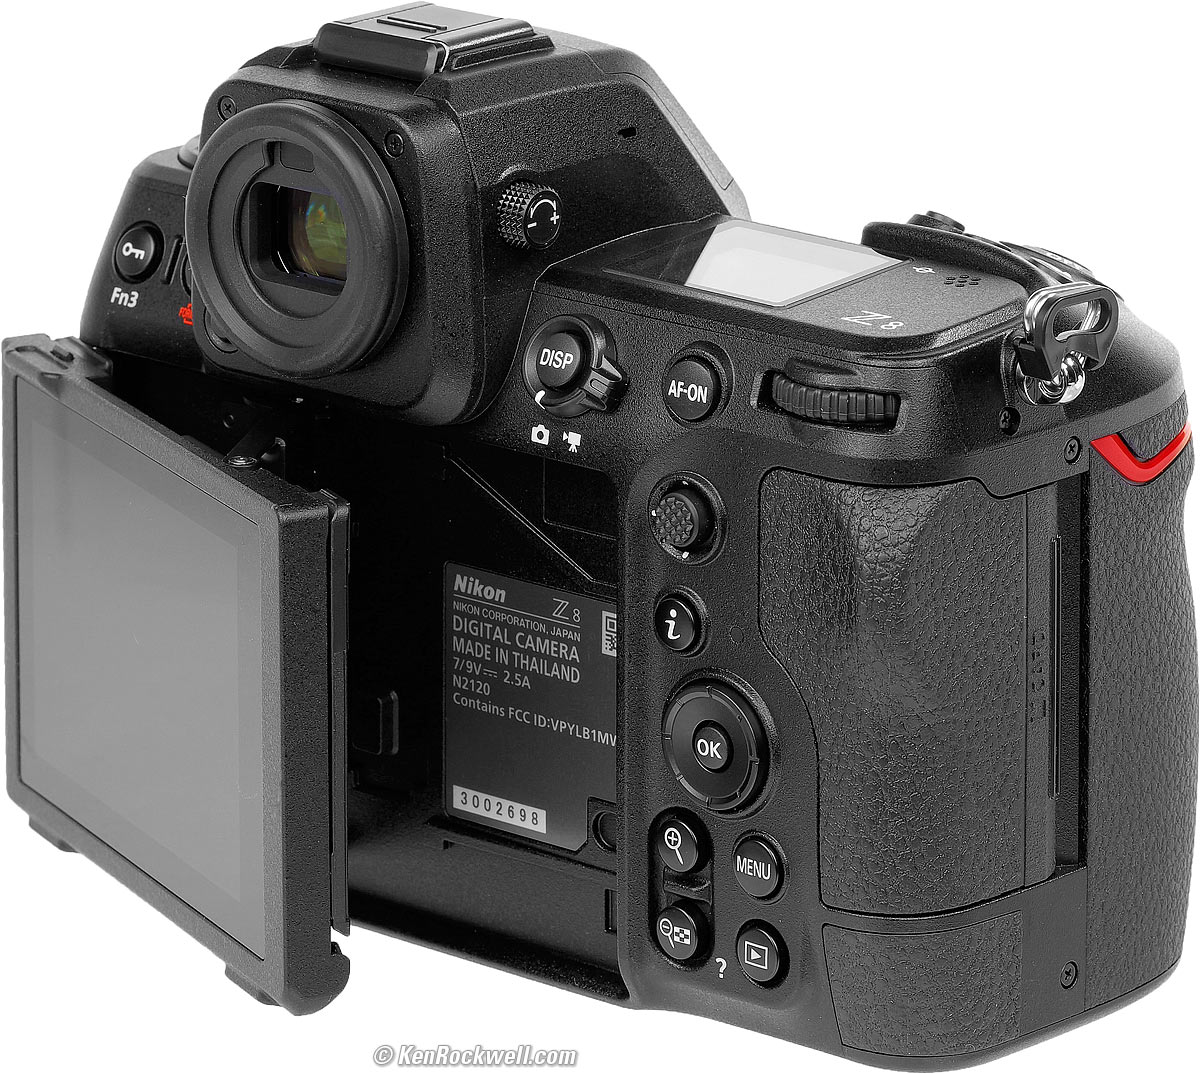 Nikon crams flagship features into compact Z8 full-frame mirrorless